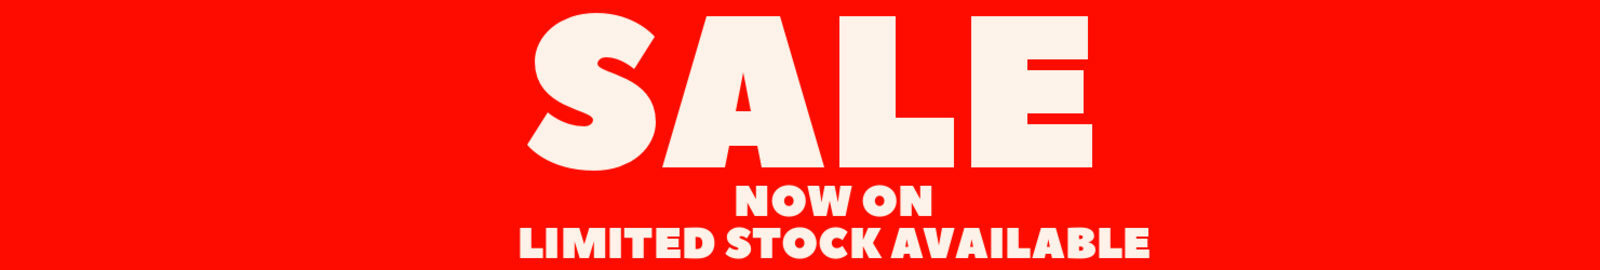 Sale now on